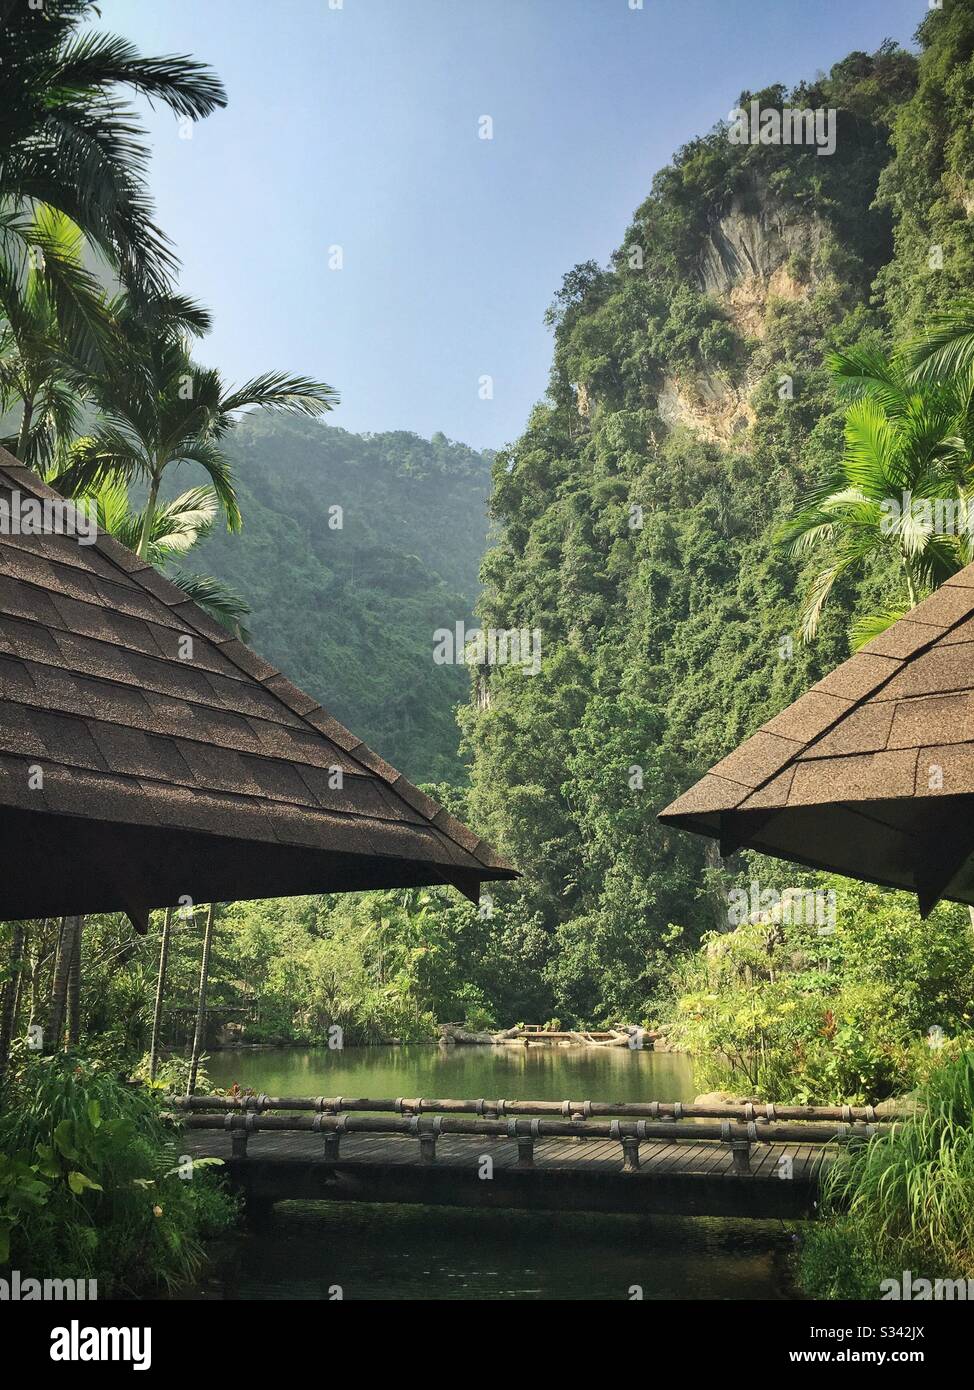 The man-made lake fed by geothermal hotsprings and the spectacular limestone karst landscape at The Banjaran Hotsprings Retreat near Ipoh, Malaysia Stock Photo